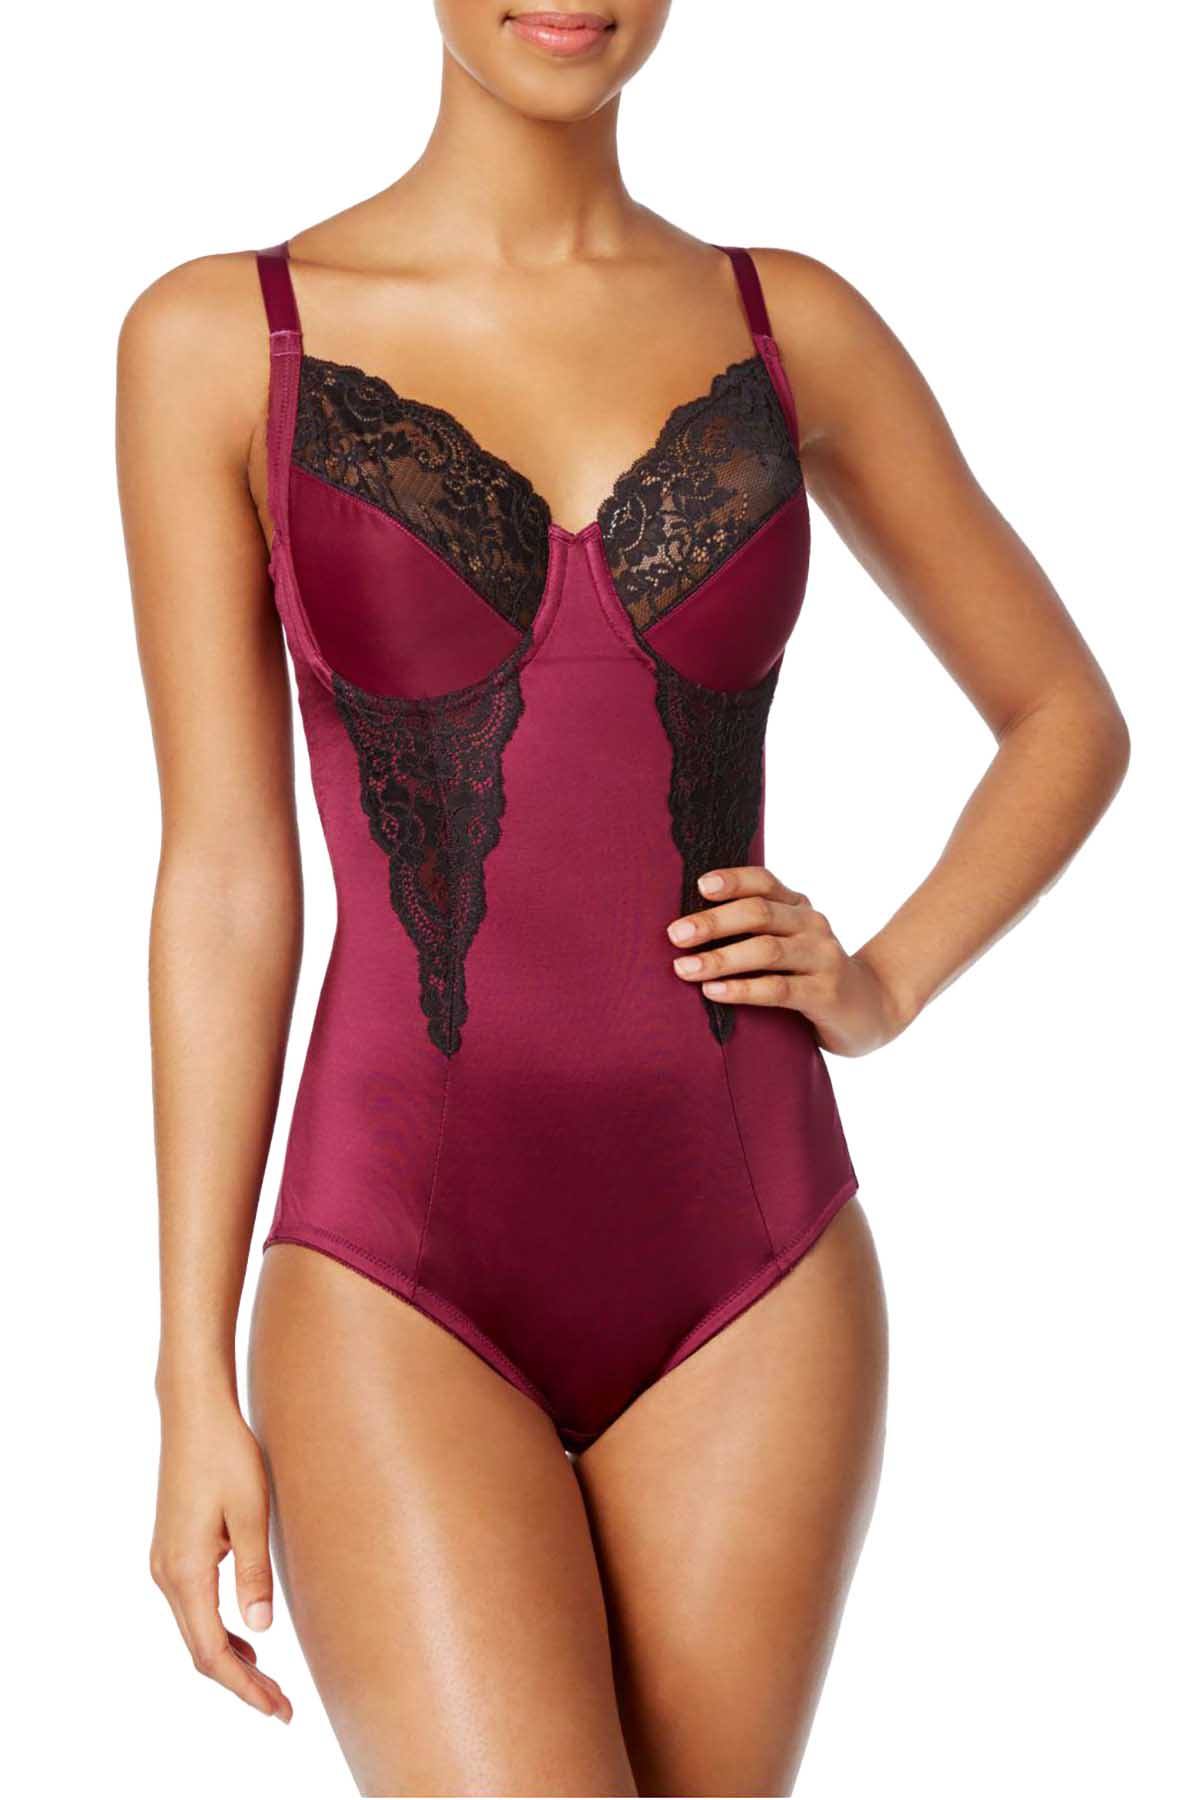 Maidenform Magenta Firm Control Embellished Unlined Shaping Bodysuit Cheapundies 3961